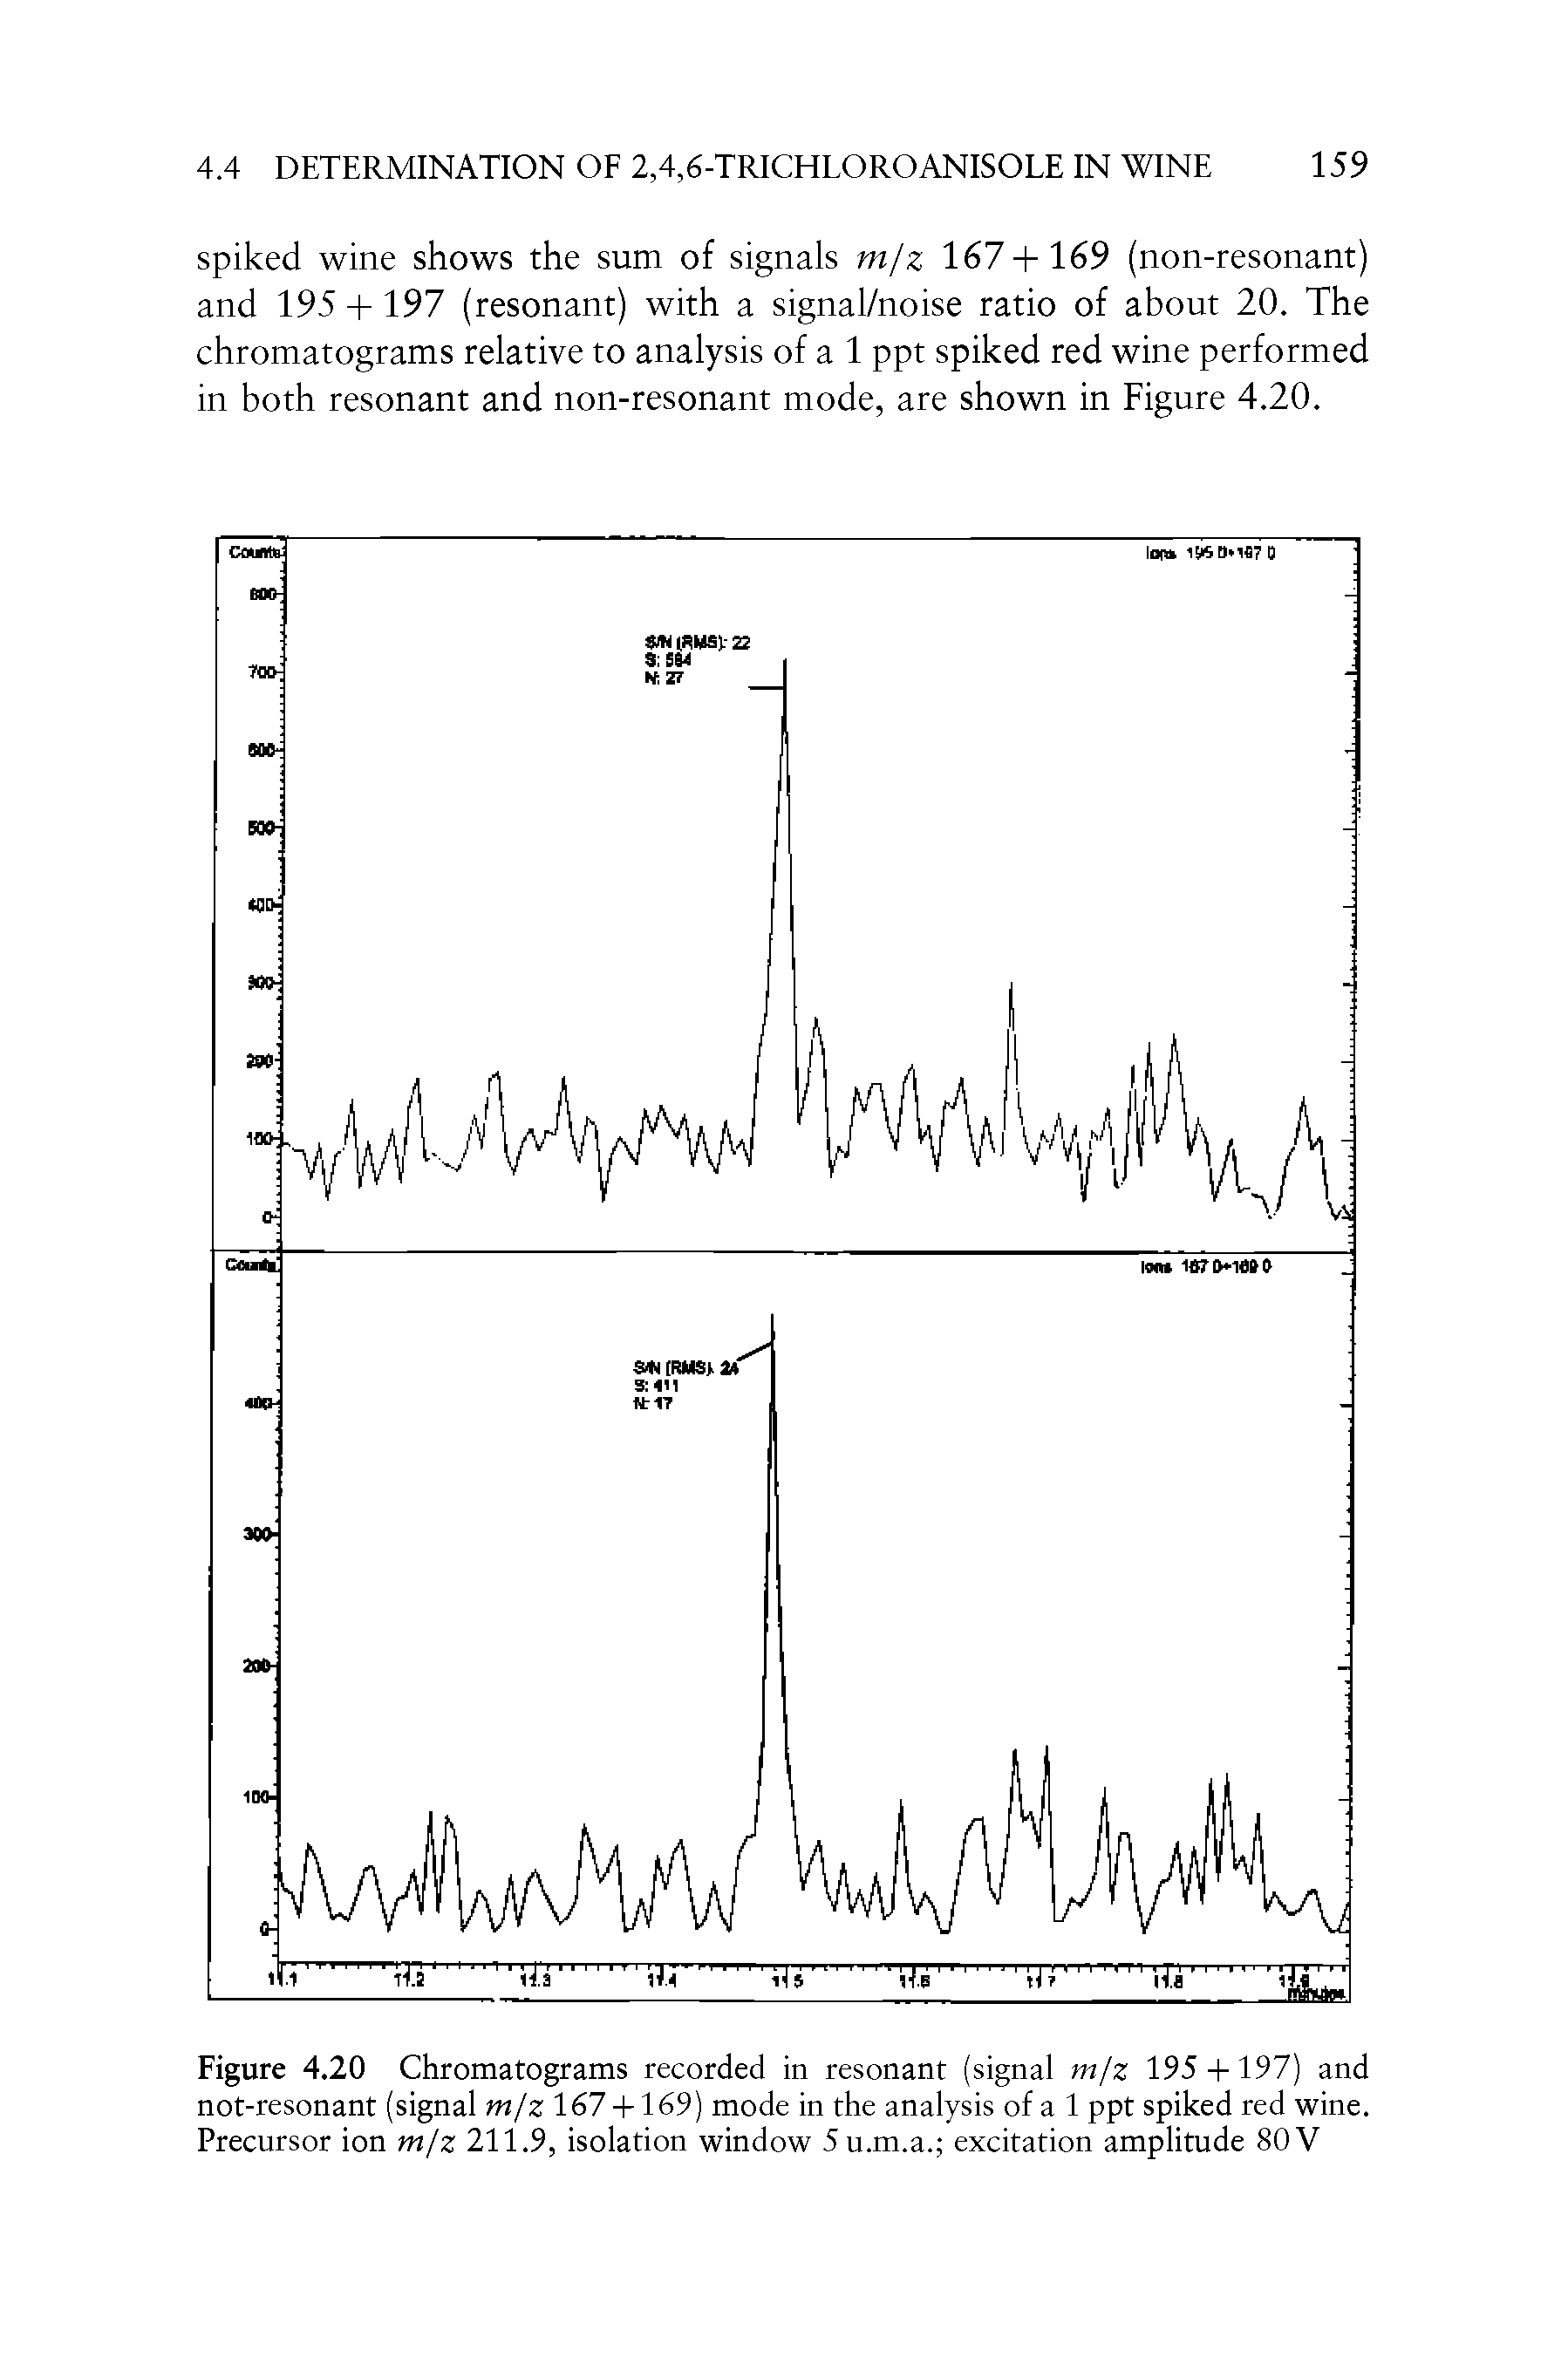 Figure 4.20 Chromatograms recorded in resonant (signal m/z 195 +197) and not-resonant (signal m/z 167 + 169) mode in the analysis of a 1 ppt spiked red wine. Precursor ion m/z 211.9, isolation window 5u.m.a. excitation amplitude 80 V...